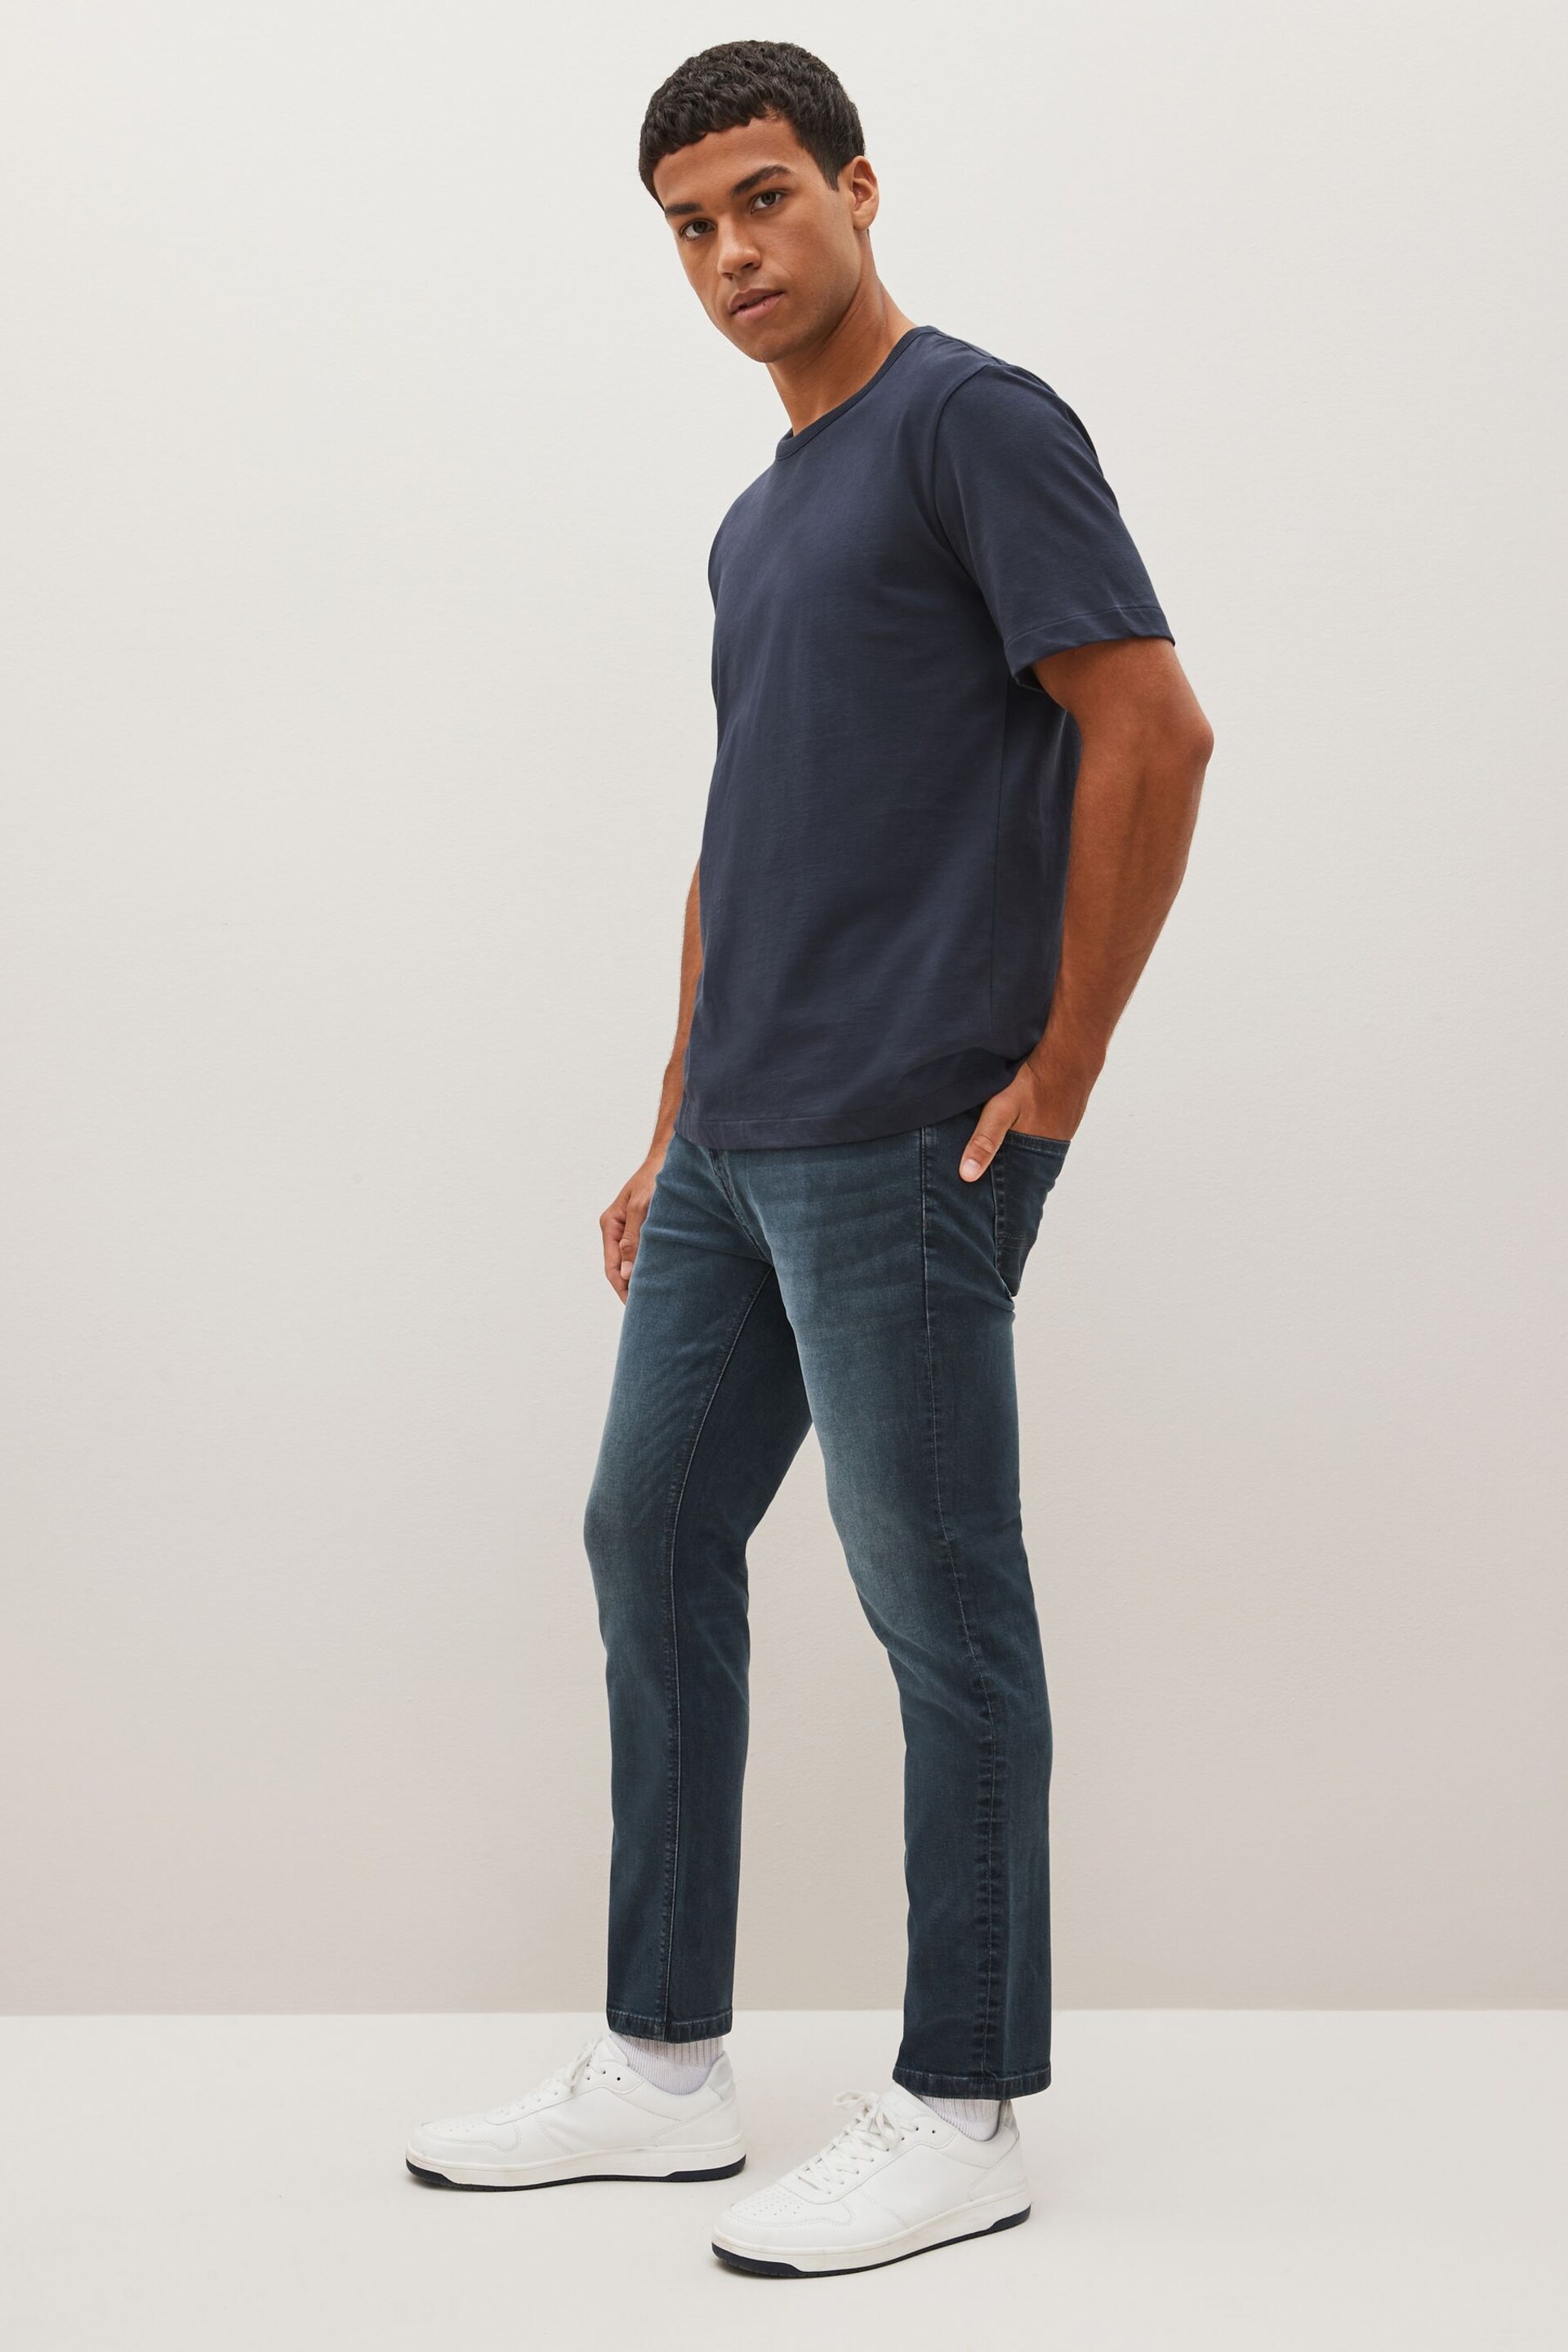 Navy Smoky Slim Fit Classic Stretch Jeans - Image 2 of 7